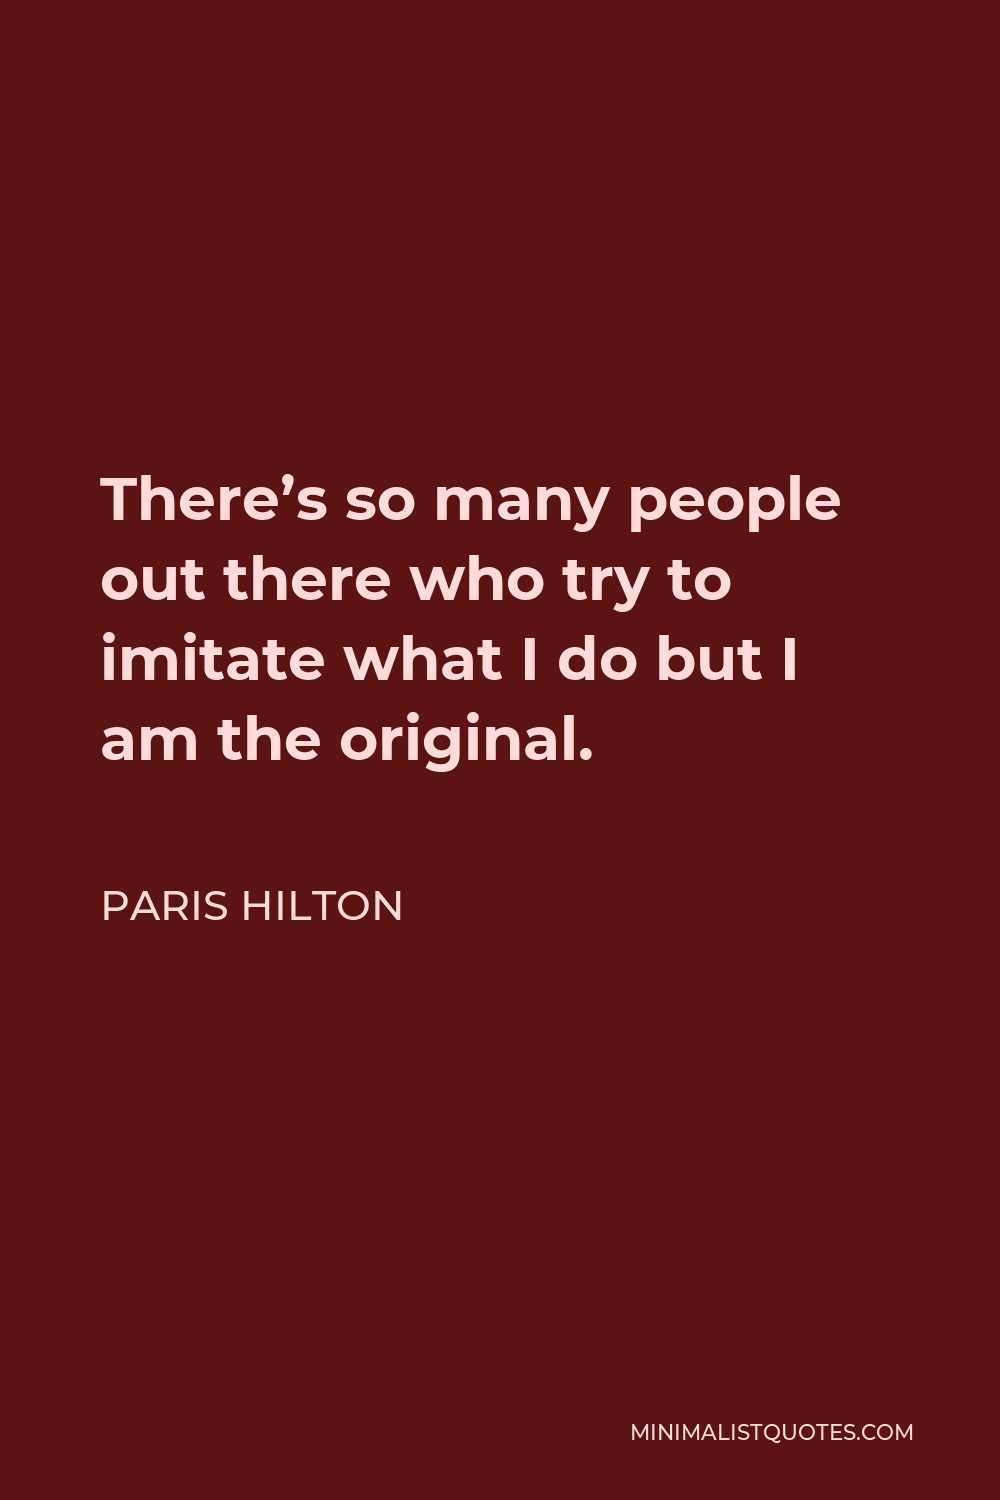 Paris Hilton Quote - There’s so many people out there who try to imitate what I do but I am the original.